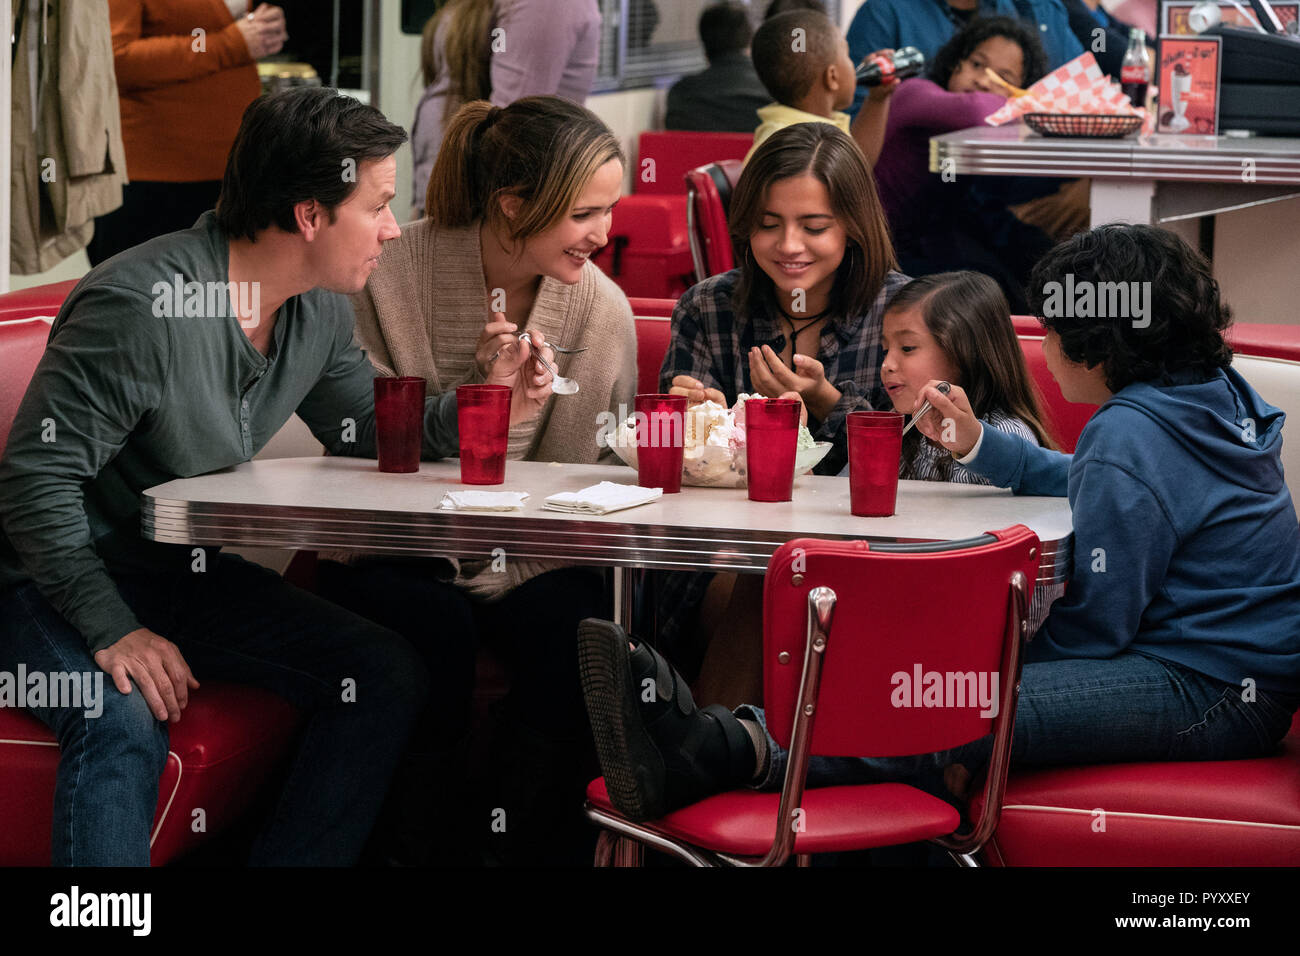 RELEASE DATE: November 16, 2018 TITLE: Instant Family STUDIO: Paramount Pictures DIRECTOR: Sean Anders PLOT: A couple find themselves in over their heads when they adopt three children. STARRING: ISABELA MONER, GUSTAVO QUIROZ, JULIANNA GAMIZ, MARK WAHLBERG as Pete and ROSE BYRNE as Ellie. (Credit Image: © Paramount Pictures/Entertainment Pictures) Stock Photo